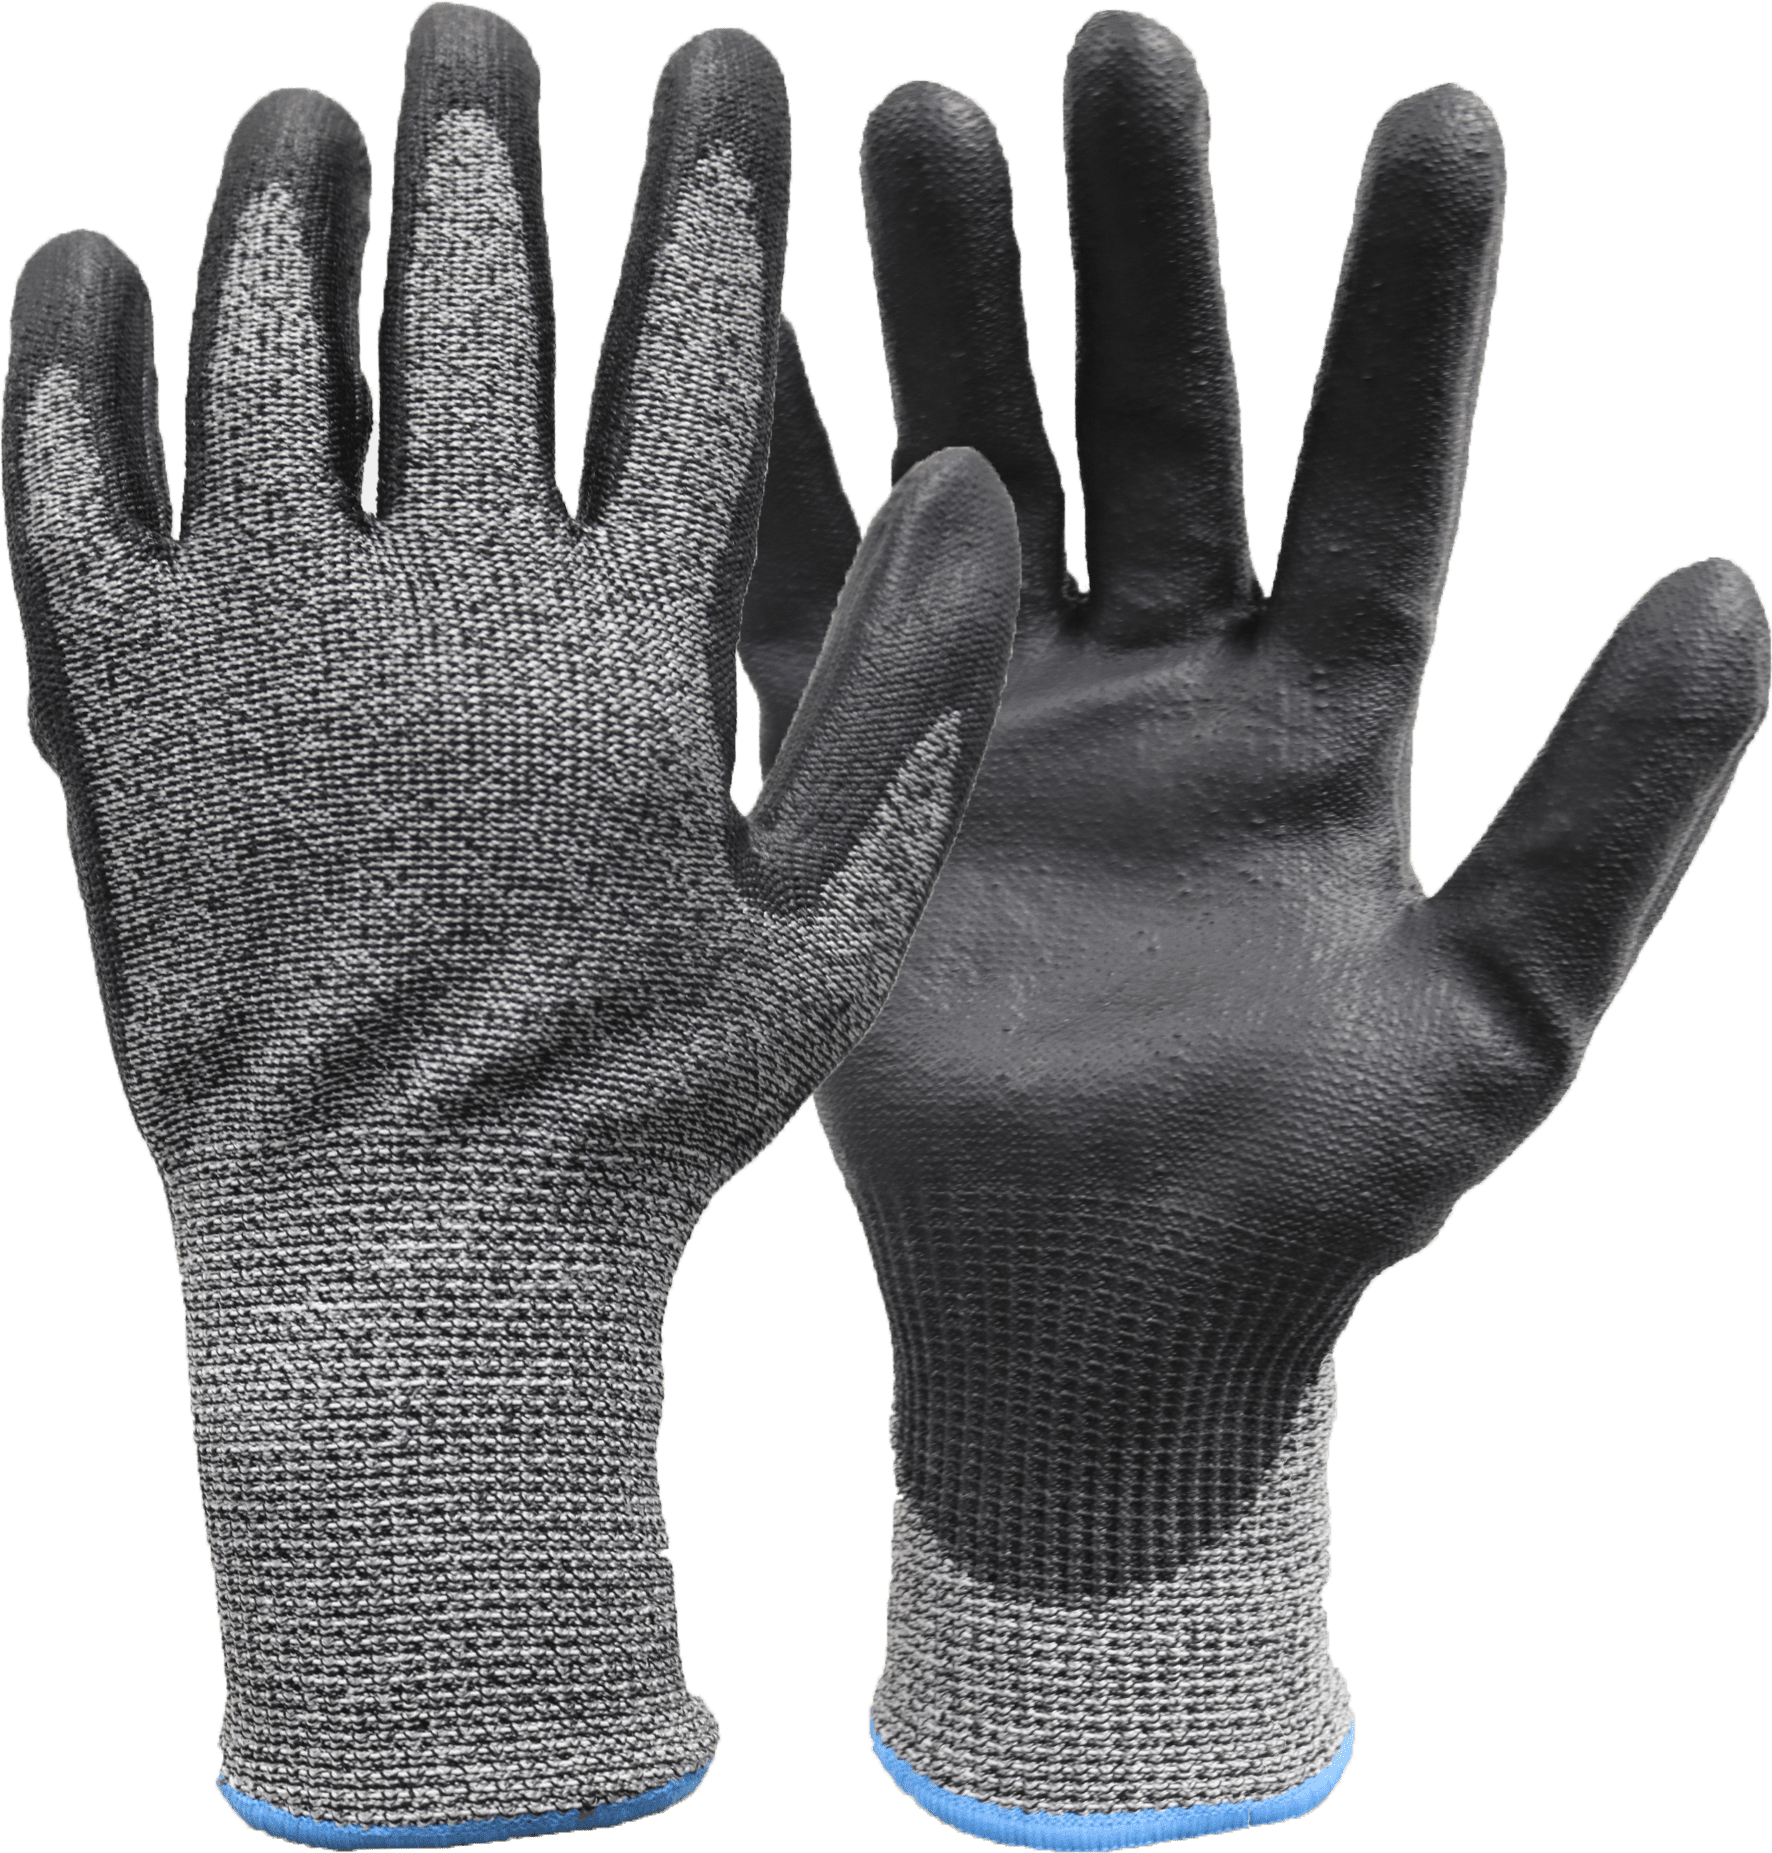 XL 12 pair 8 Mil Claw Cover By Manzella Size 11 Unlined Nitrile Gloves 